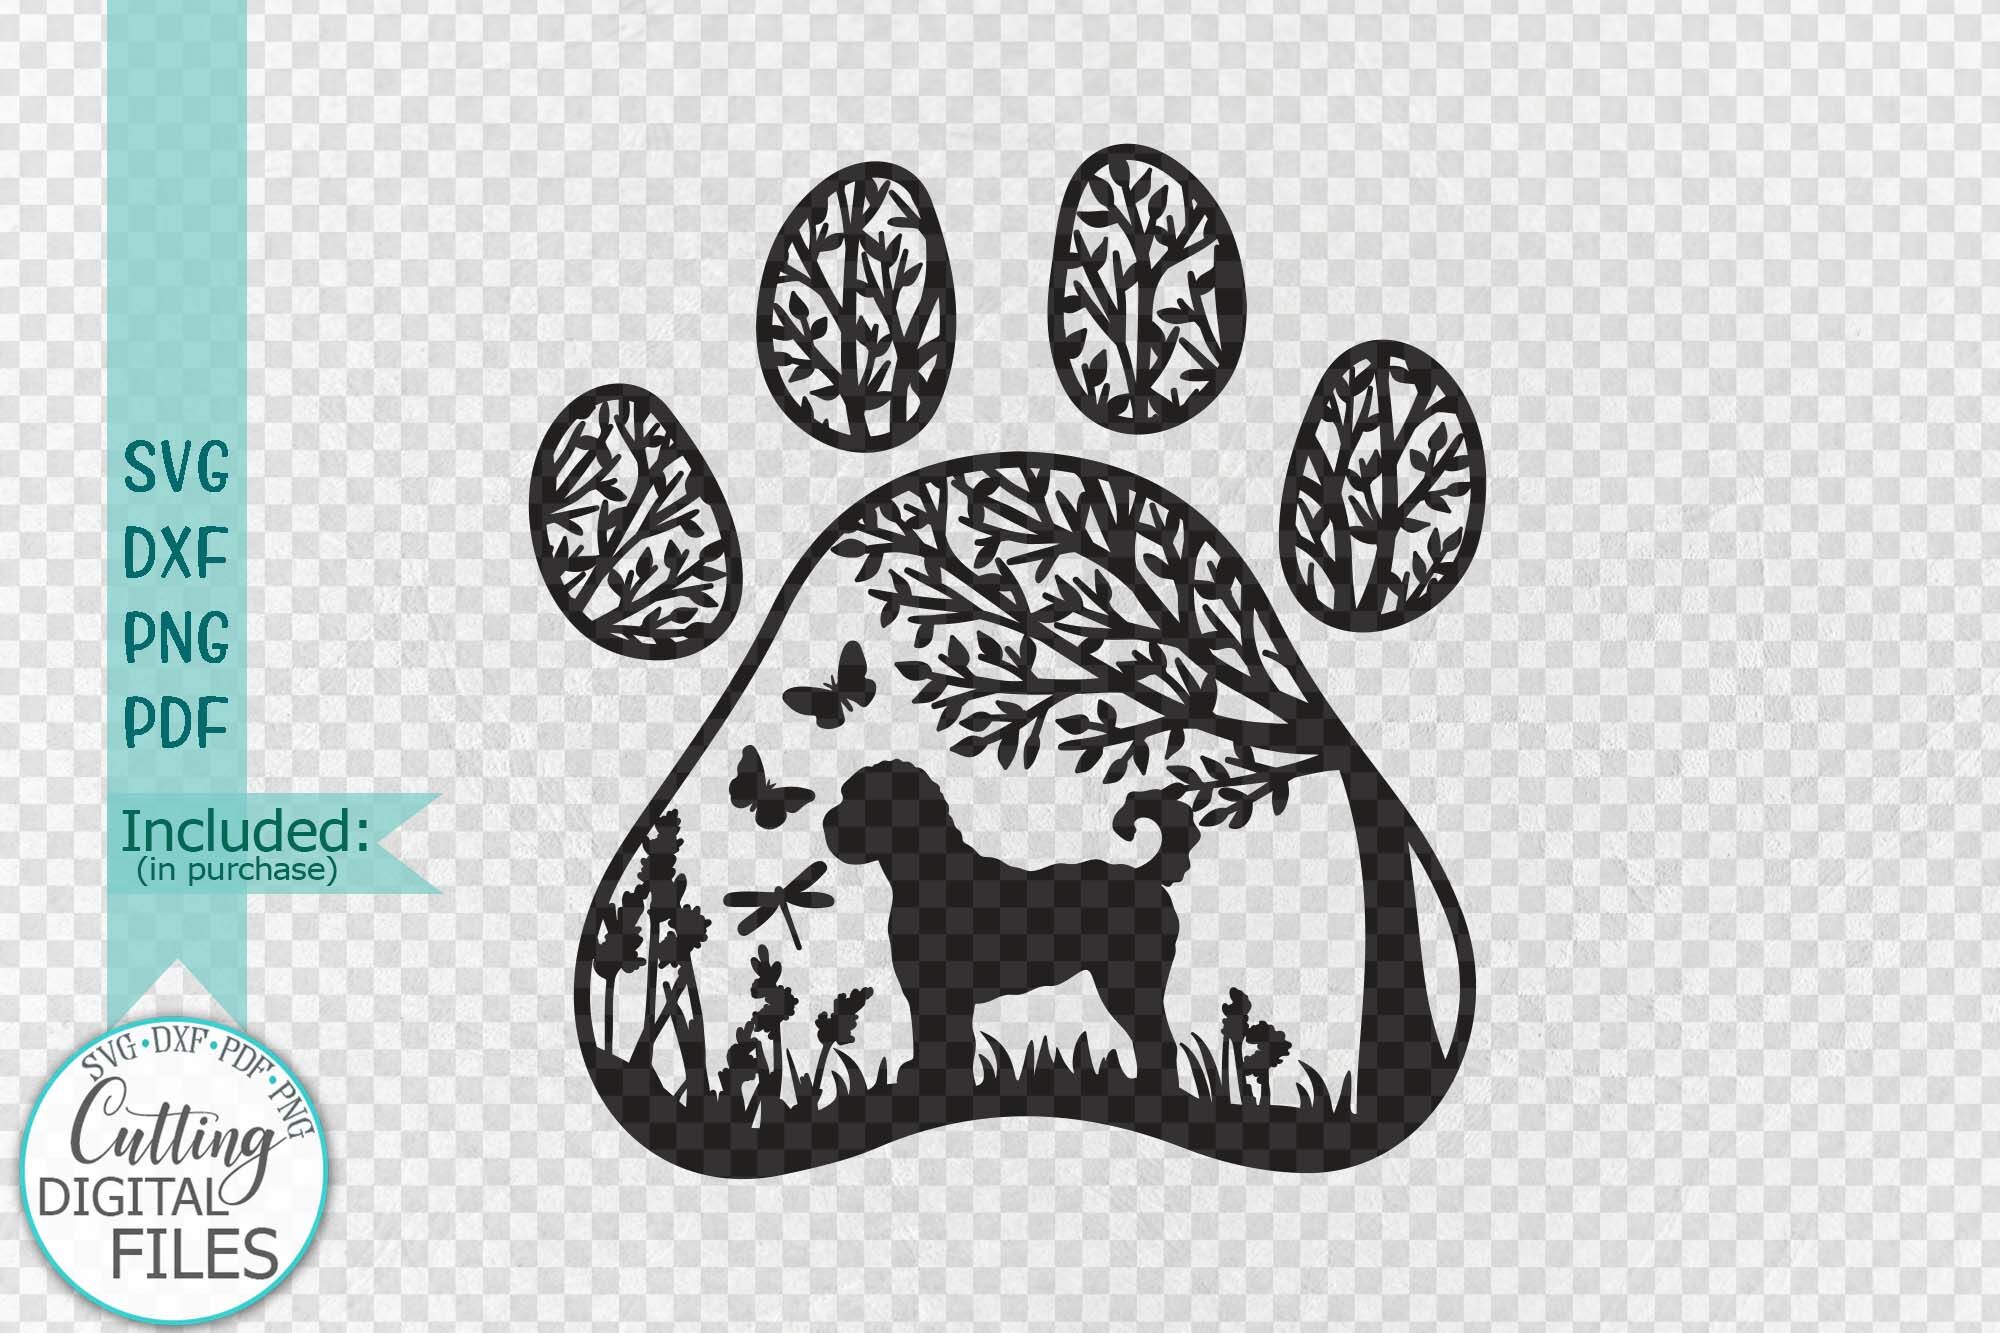 Download Labradoodle Paw Dog Sign Svg Dxf Pdf Cut Out Template By Kartcreation Thehungryjpeg Com